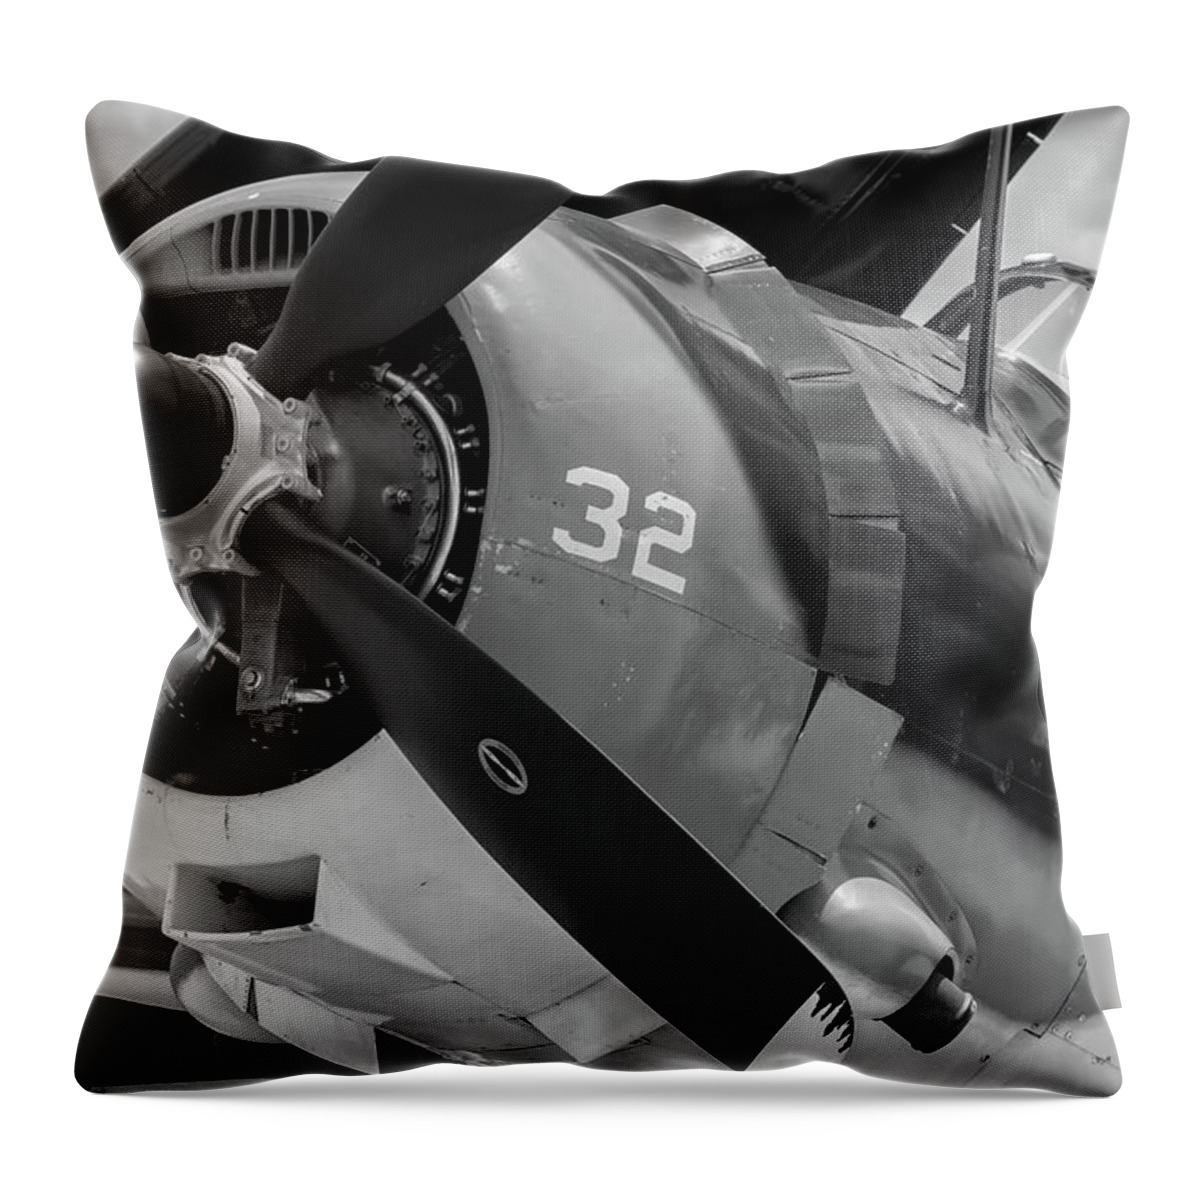 2017 Throw Pillow featuring the photograph Helldiver's Nose - 2017 Christopher Buff, www.Aviationbuff.com by Chris Buff